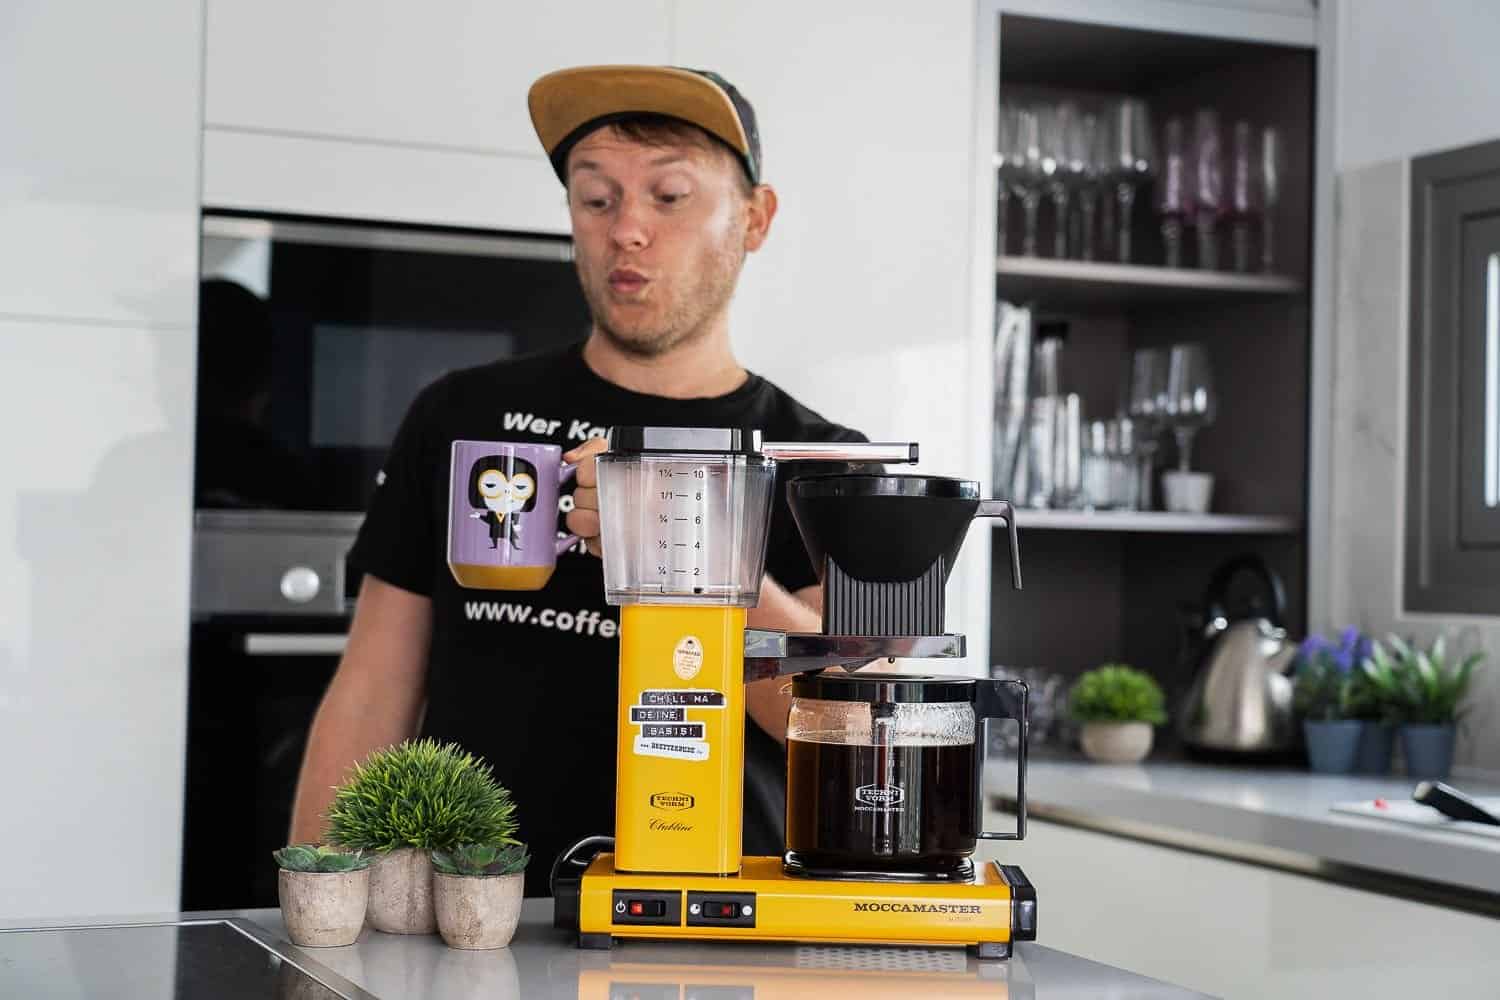 Daarom analogie patroon Moccamaster review 2023: Move over, alle andere koffiezetapparaten!